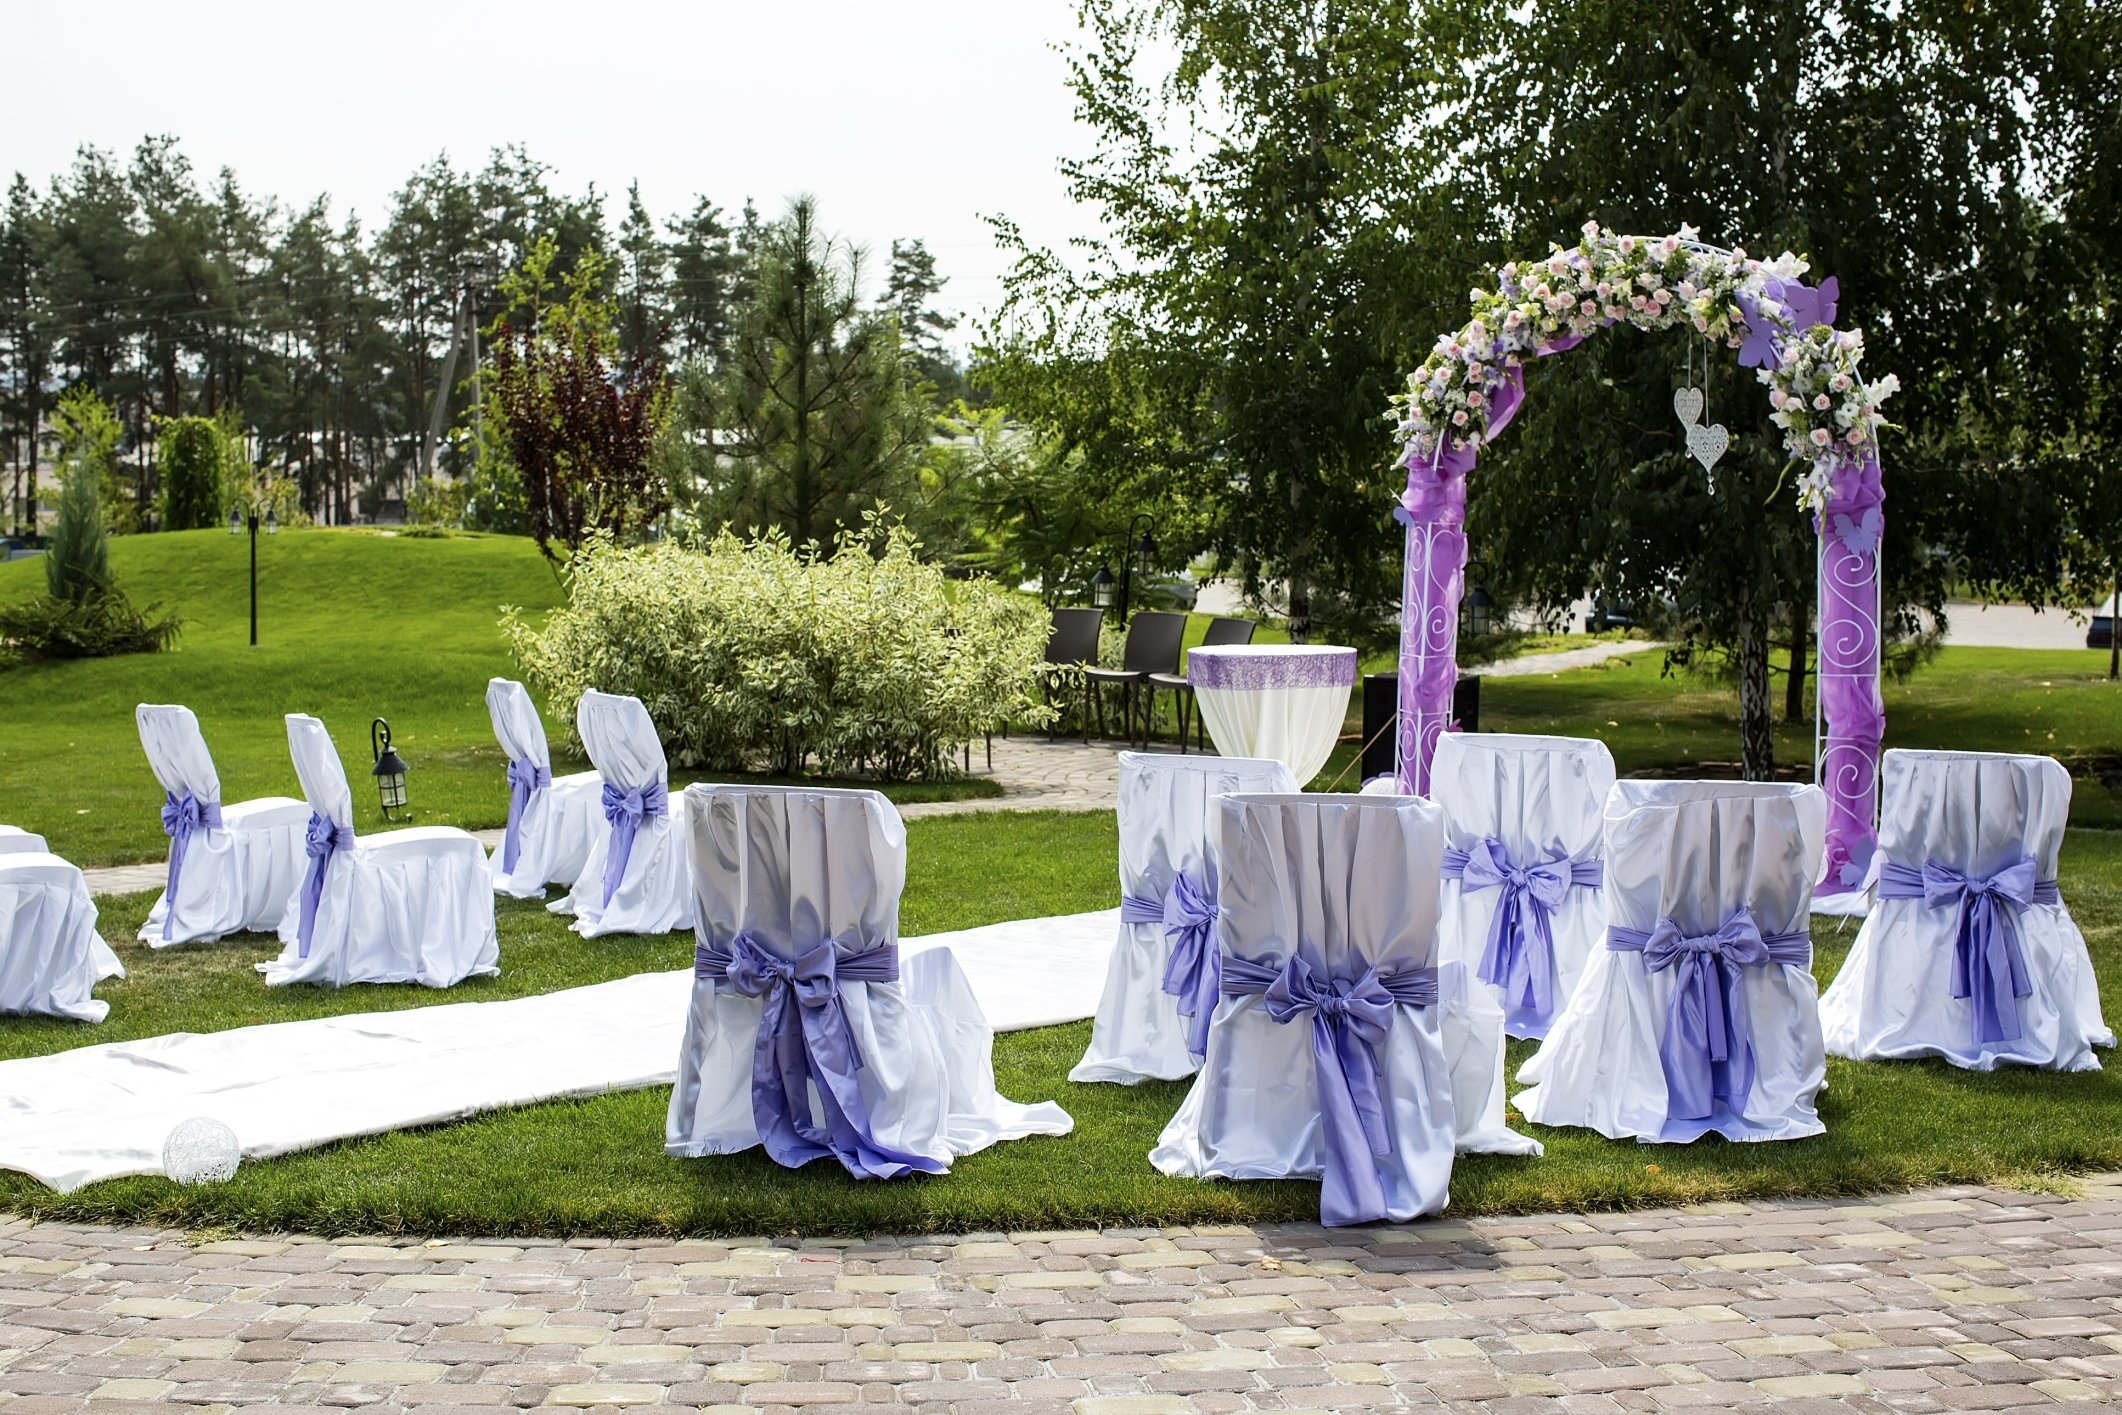 10 Ideal Wedding Ideas For Small Weddings the pros and cons of small wedding venues easy weddings uk 50th 2022